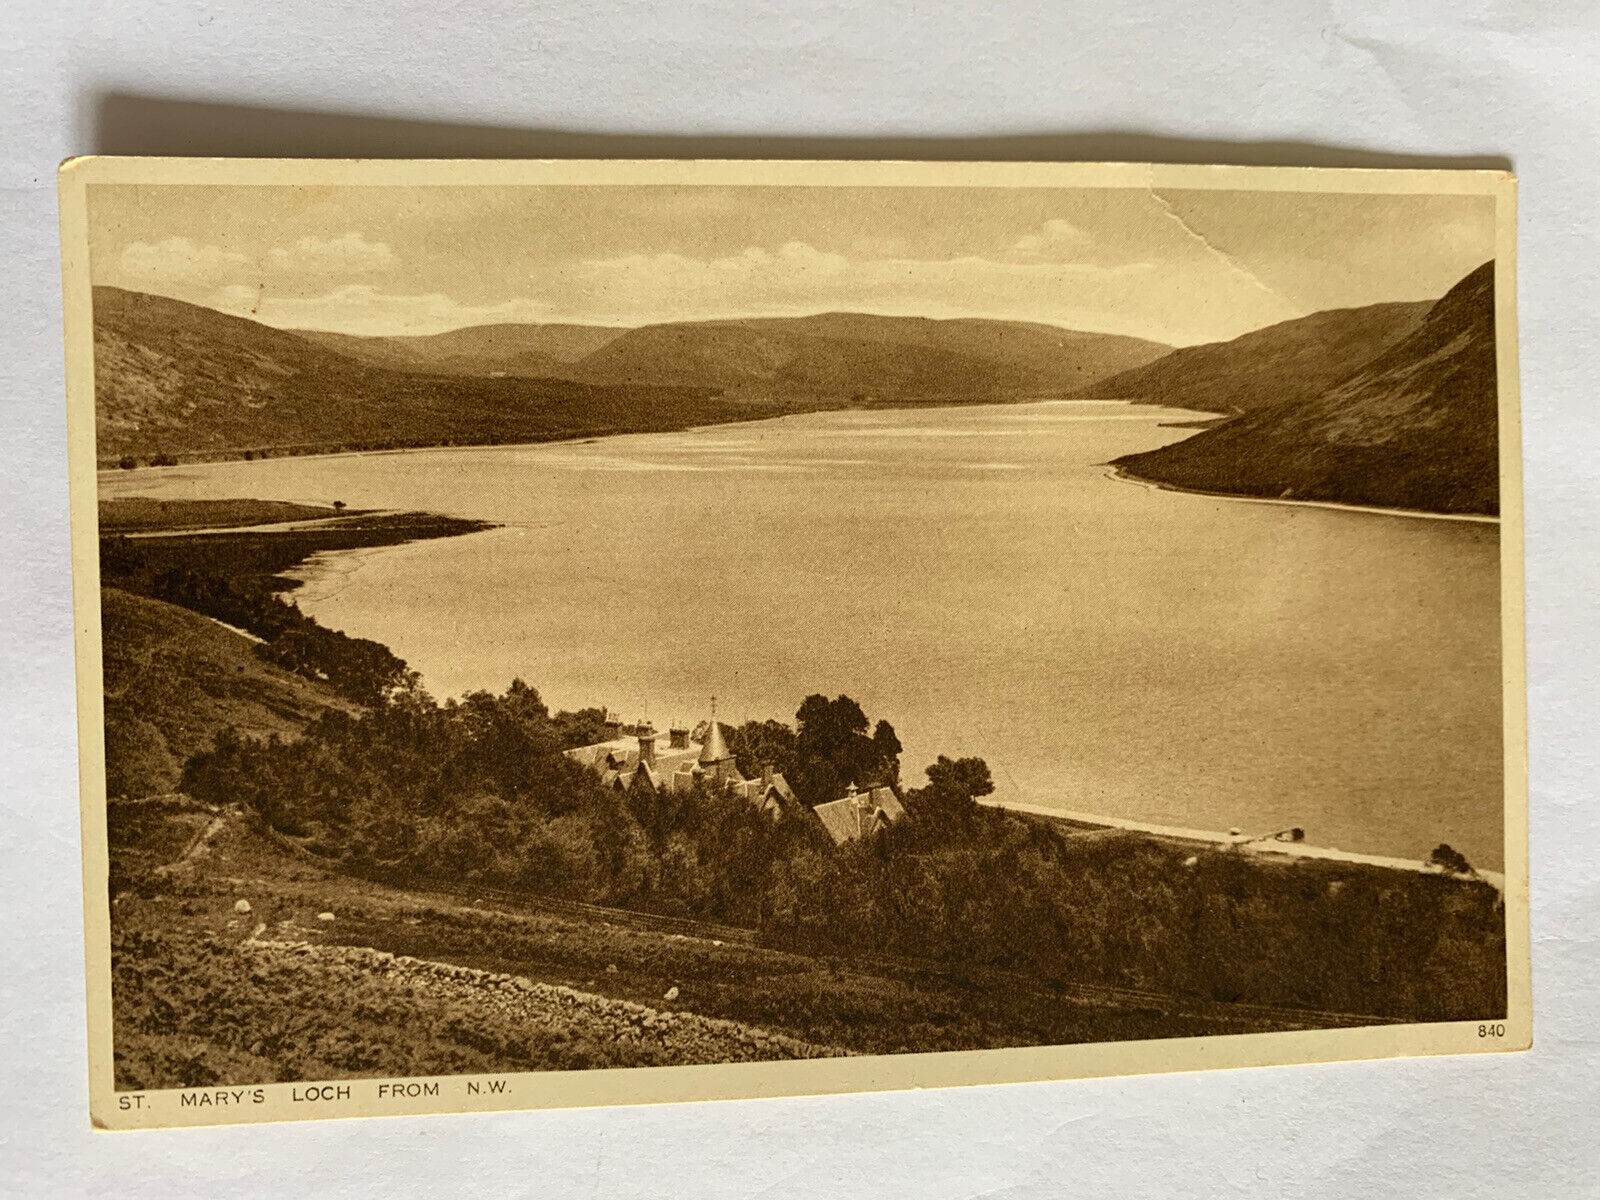 House Clearance - Vintage RP Service - ST MARY'S LOCH FROM N.W - SELKIRK - BORDERS - SCOTLAND